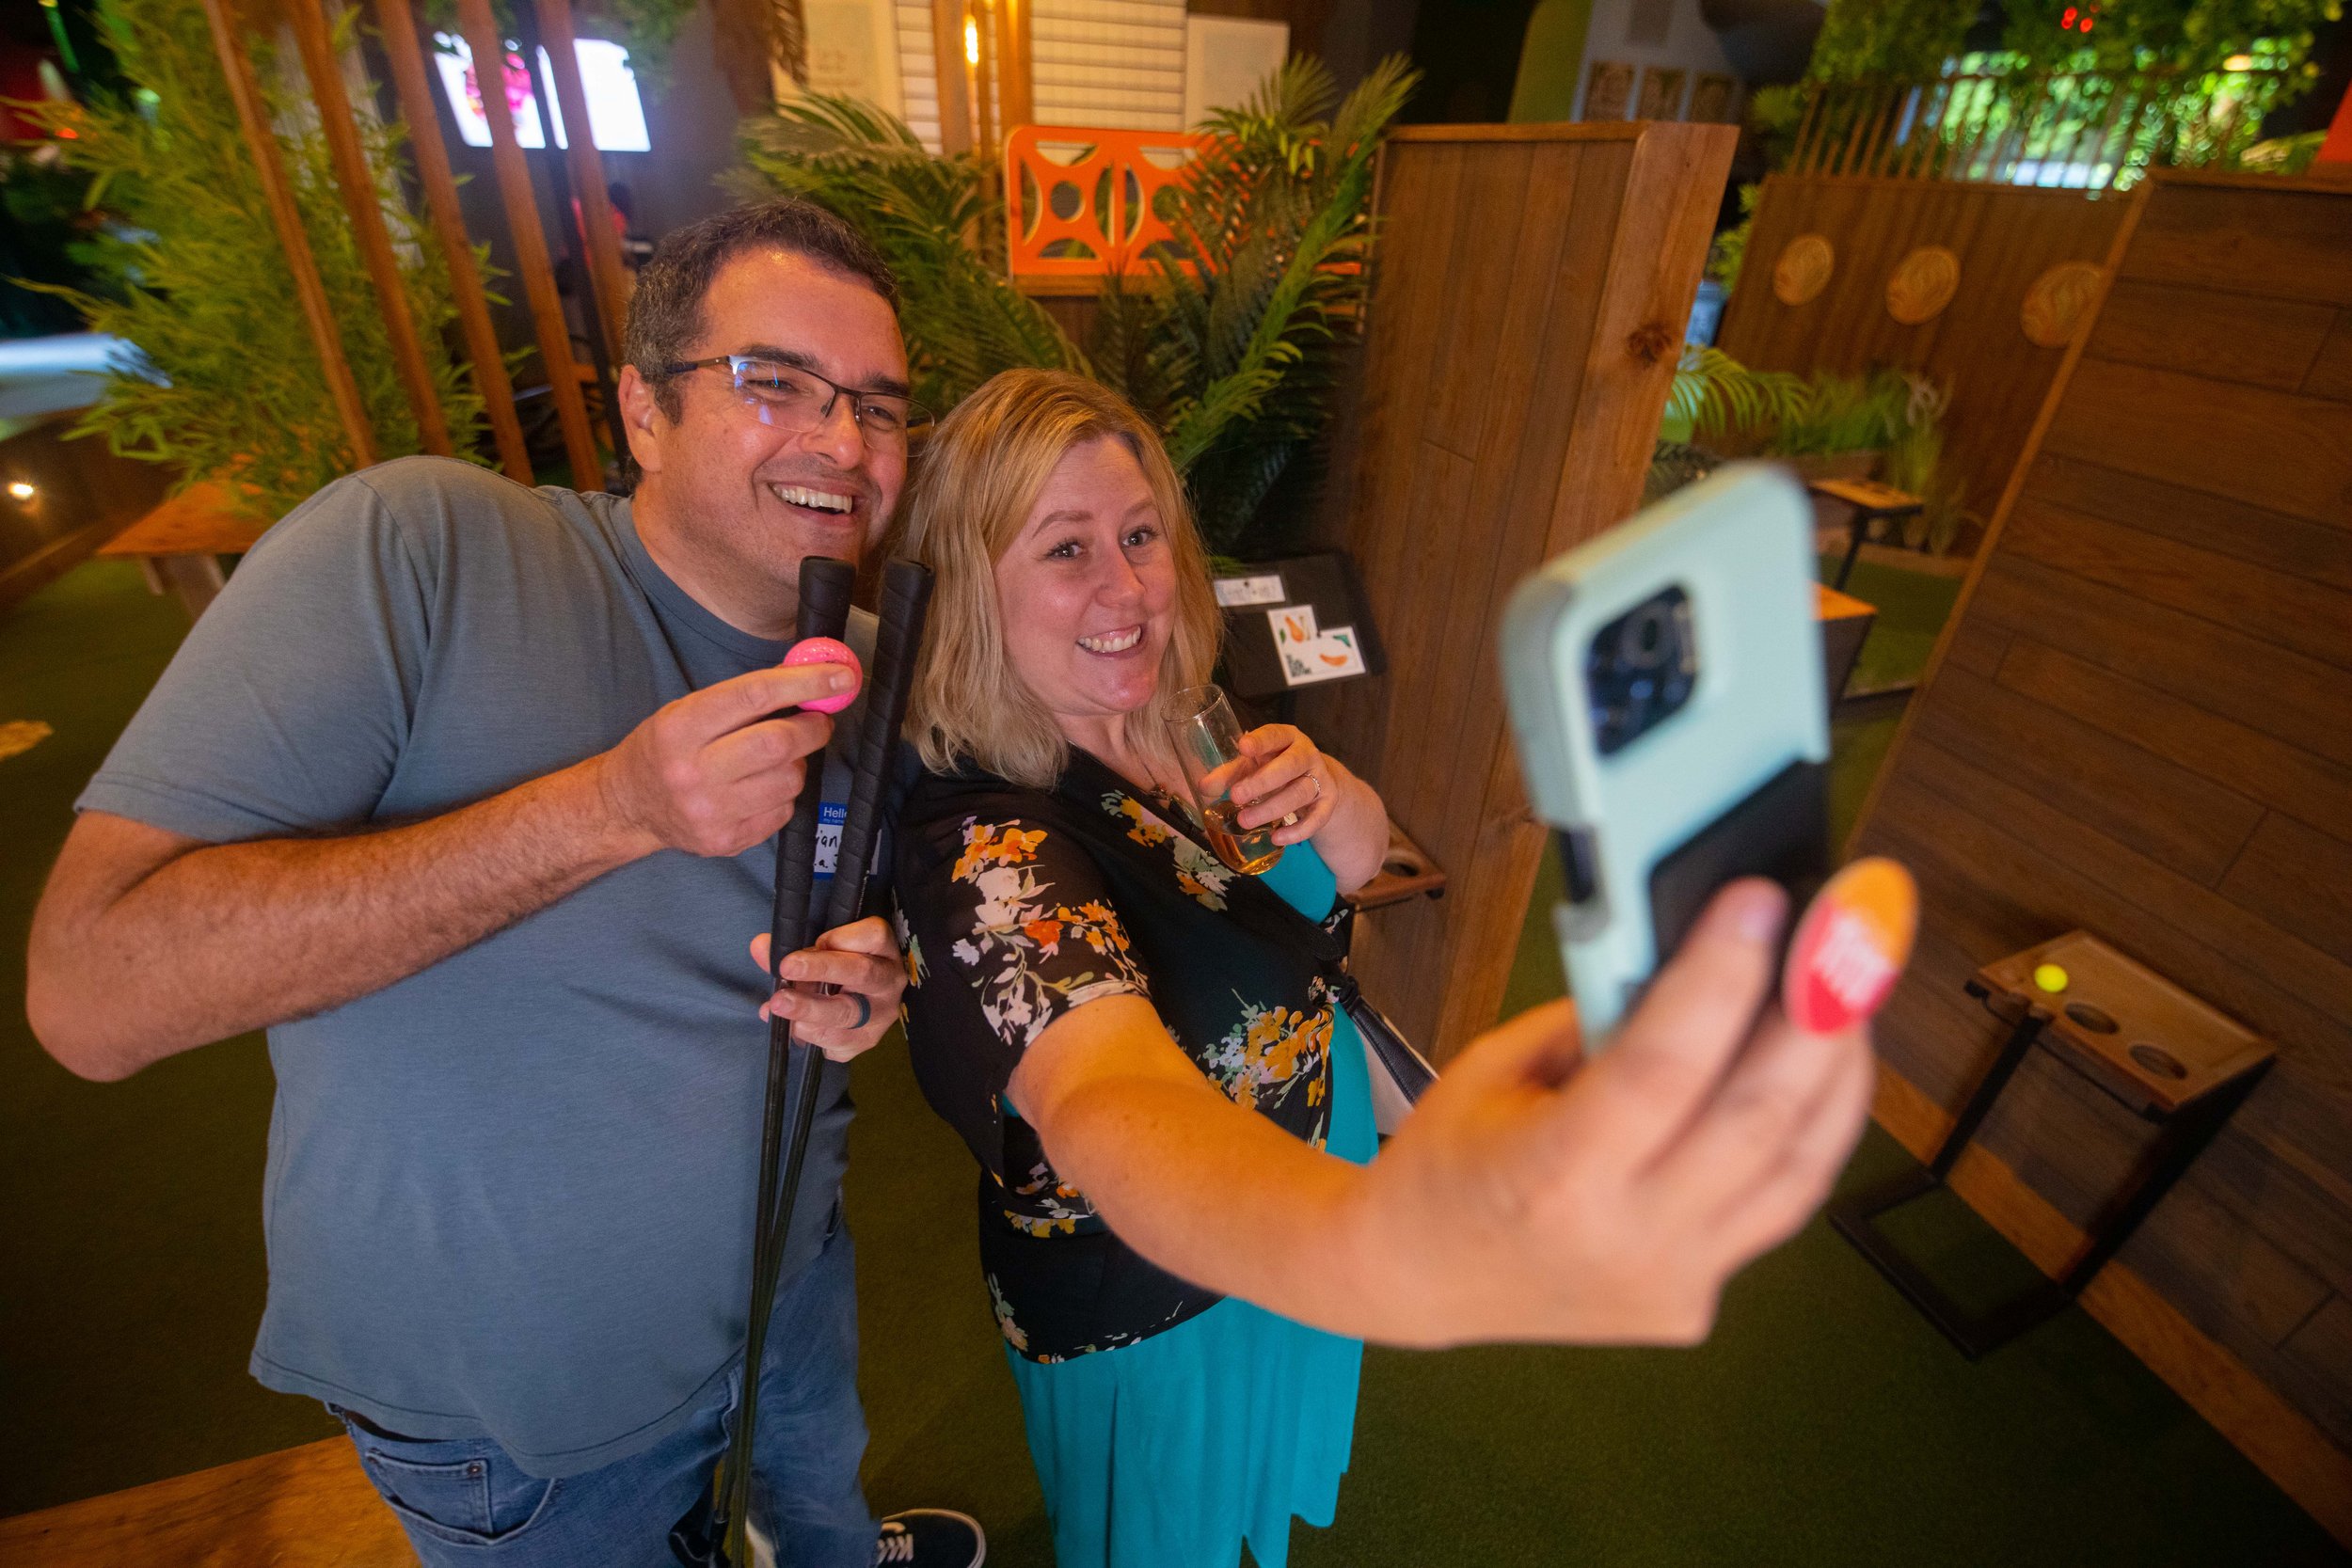  Attendee posing for a selfie while playing mini golf during Mini Golf Gathering for Grievers on 6.4.22 